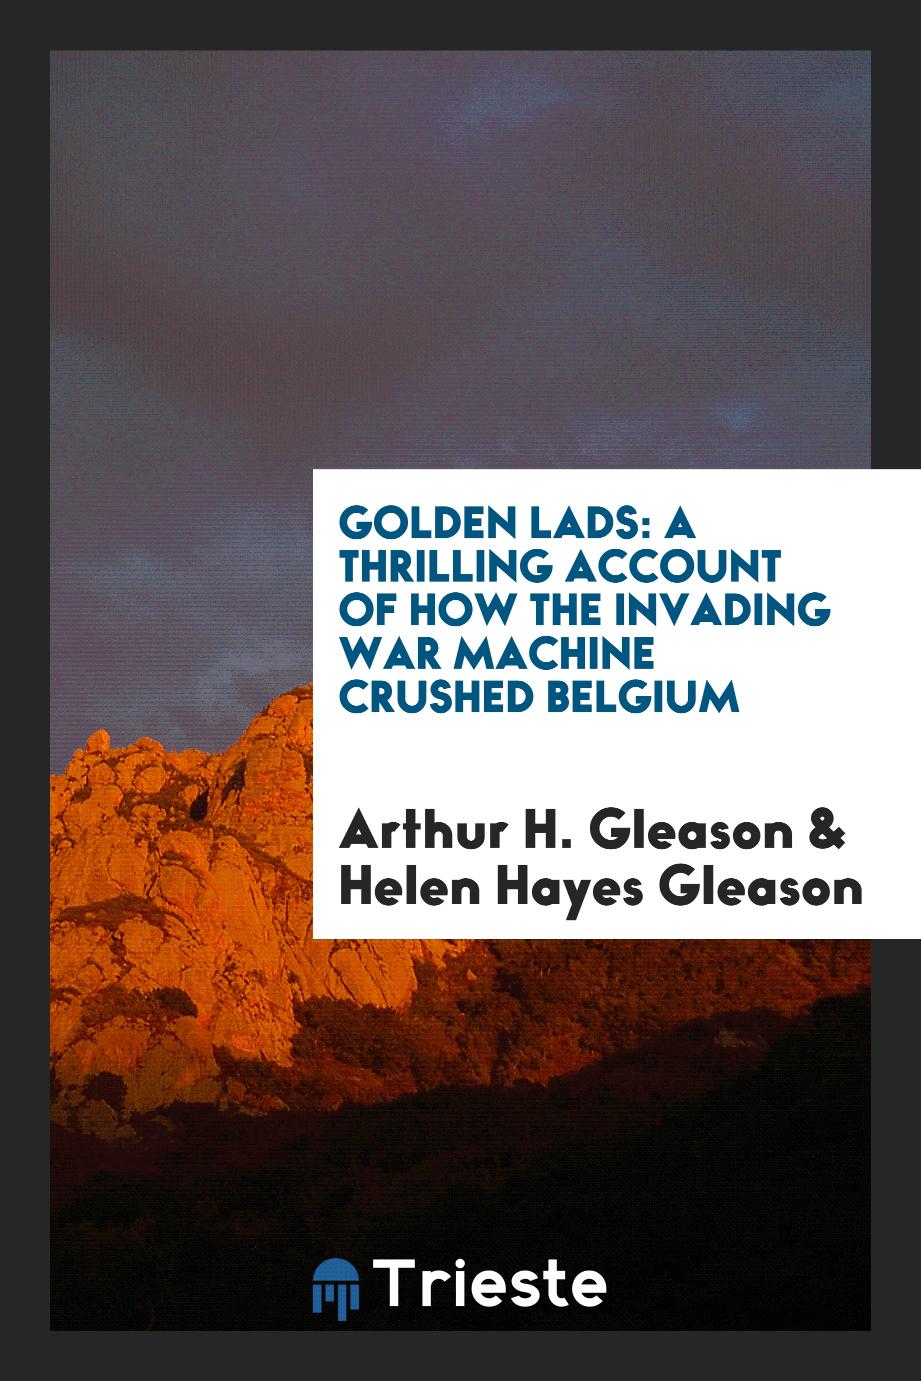 Golden lads: a thrilling account of how the invading war machine crushed Belgium